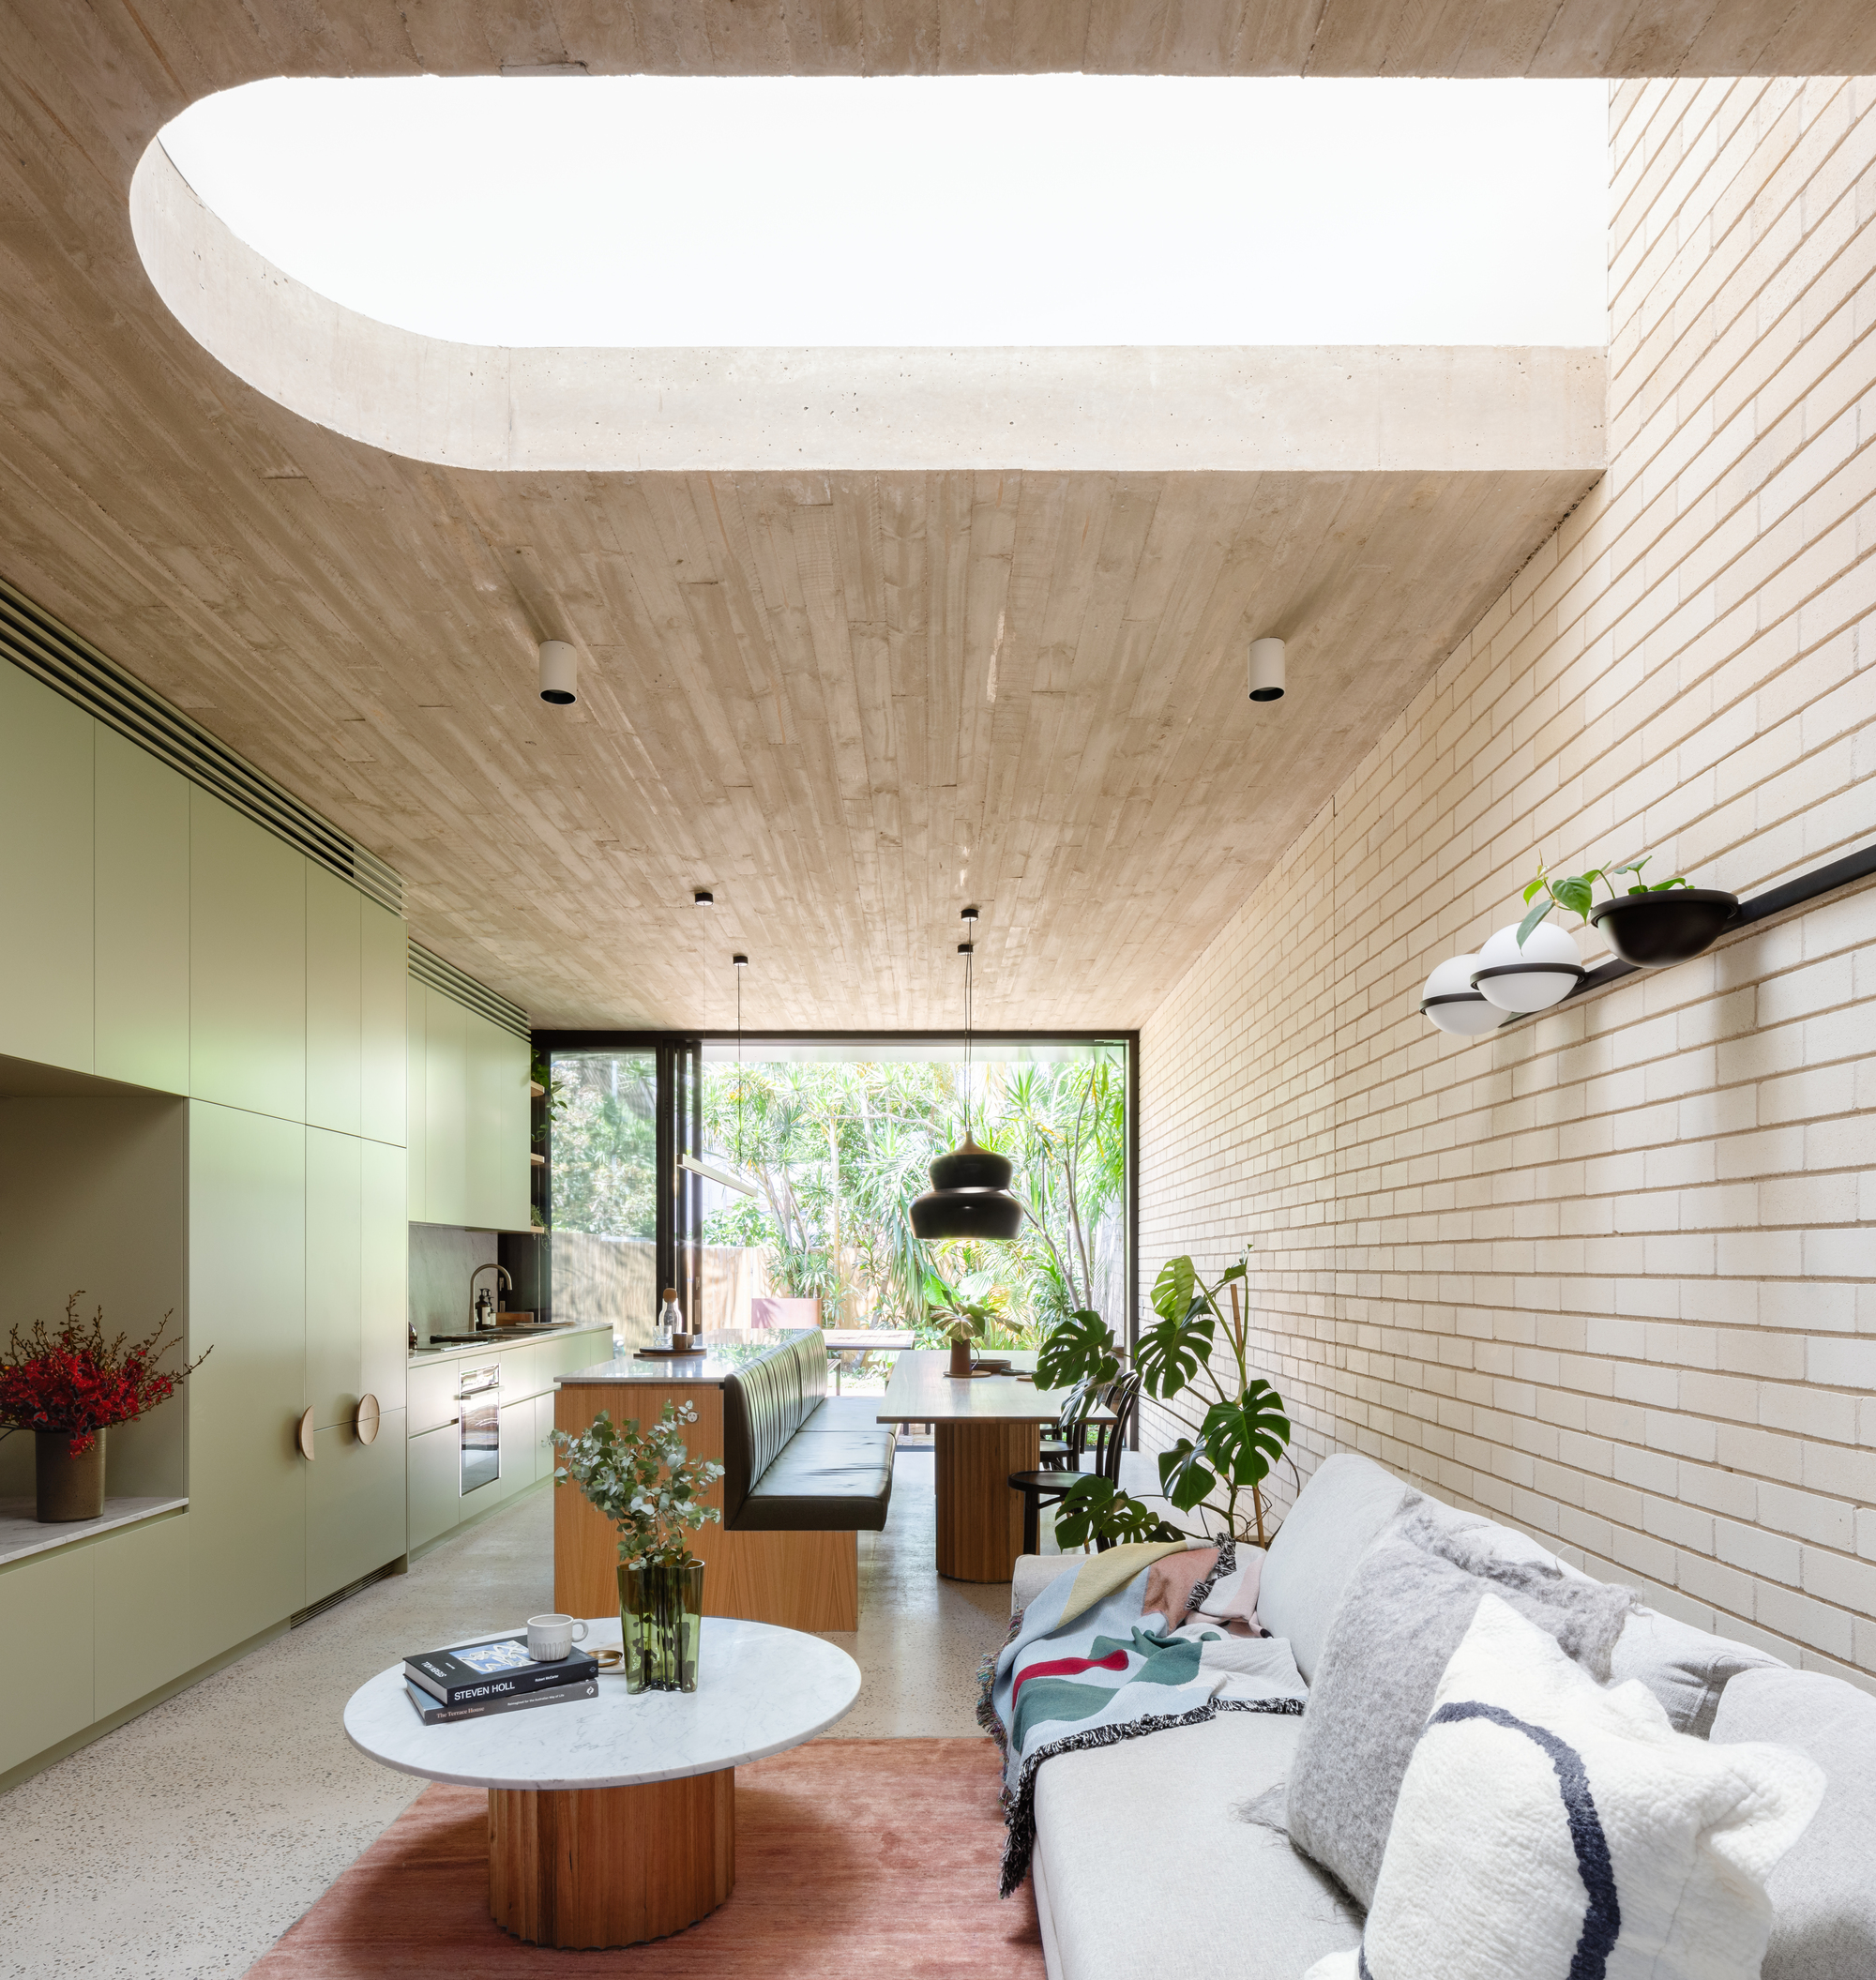 Natural light flooding concrete blonde through skylights and large glass doors